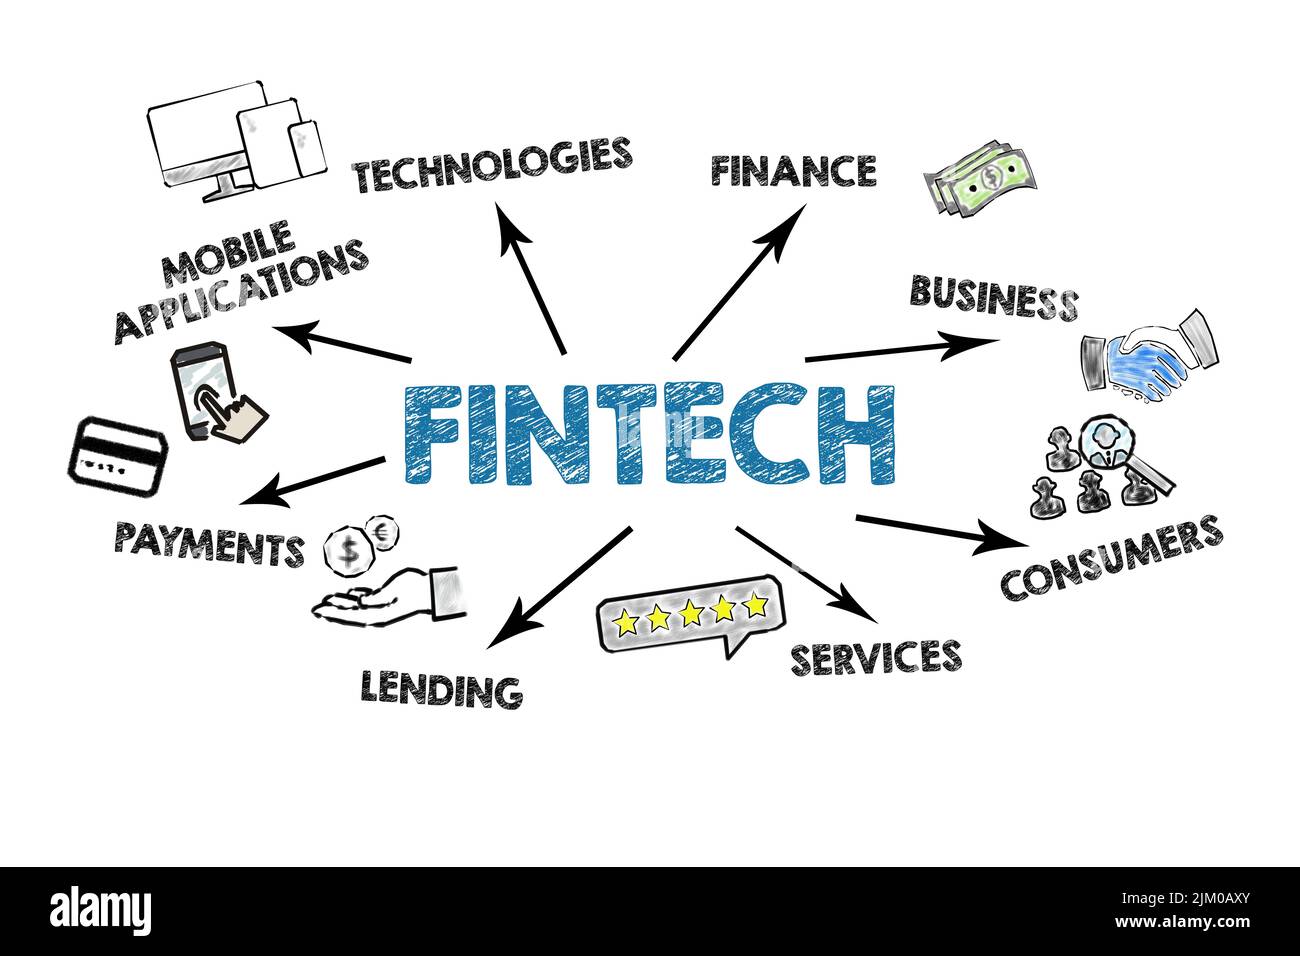 Fintech. Illustration with keywords, icons and direction arrows on a white background. Stock Photo